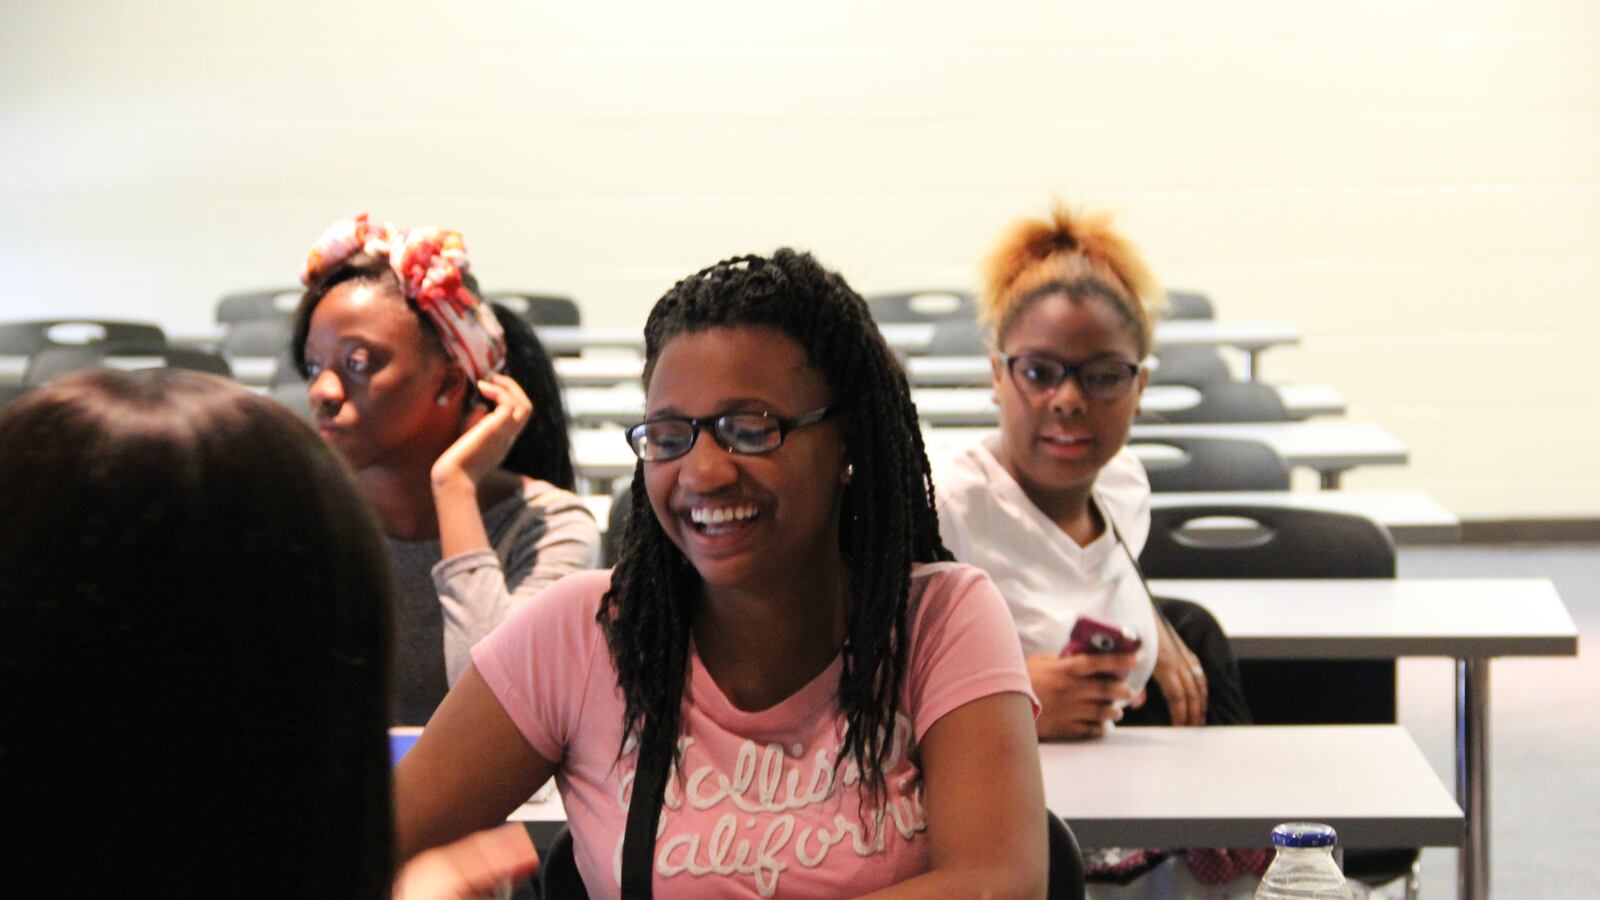 High school student Dekena Ervin attends an entrepreneurship class at the University of Memphis through the Summer Institutes, launched in 2015 in partnership with GRAD Academy Memphis. The South Memphis charter school announced it would be closing this summer.